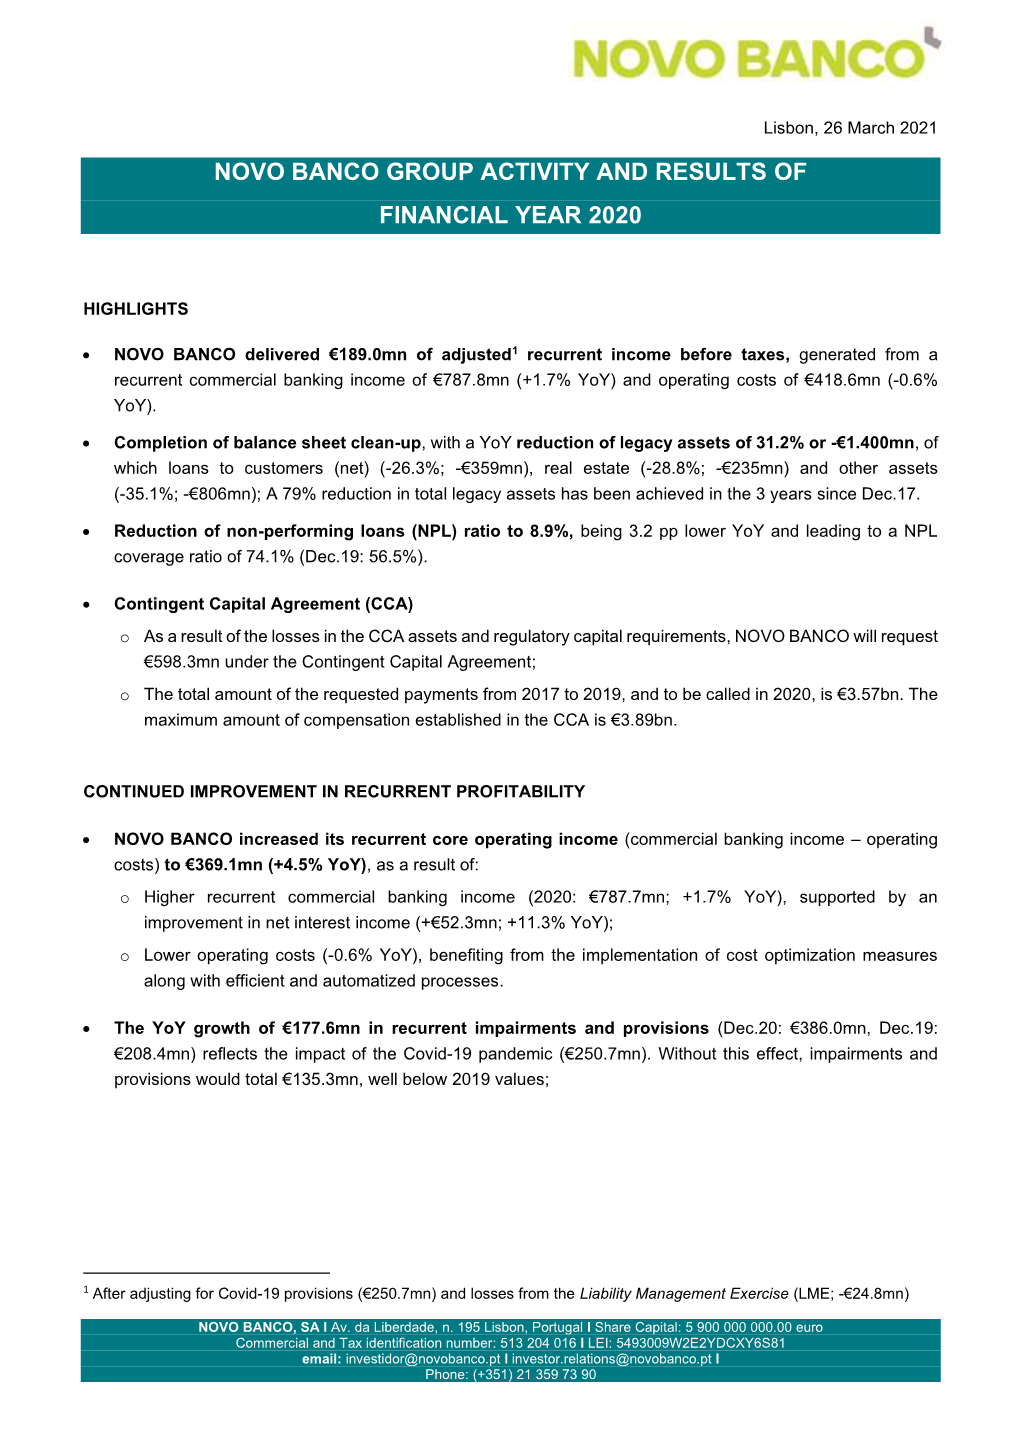 Novo Banco Group Activity and Results of Financial Year 2020